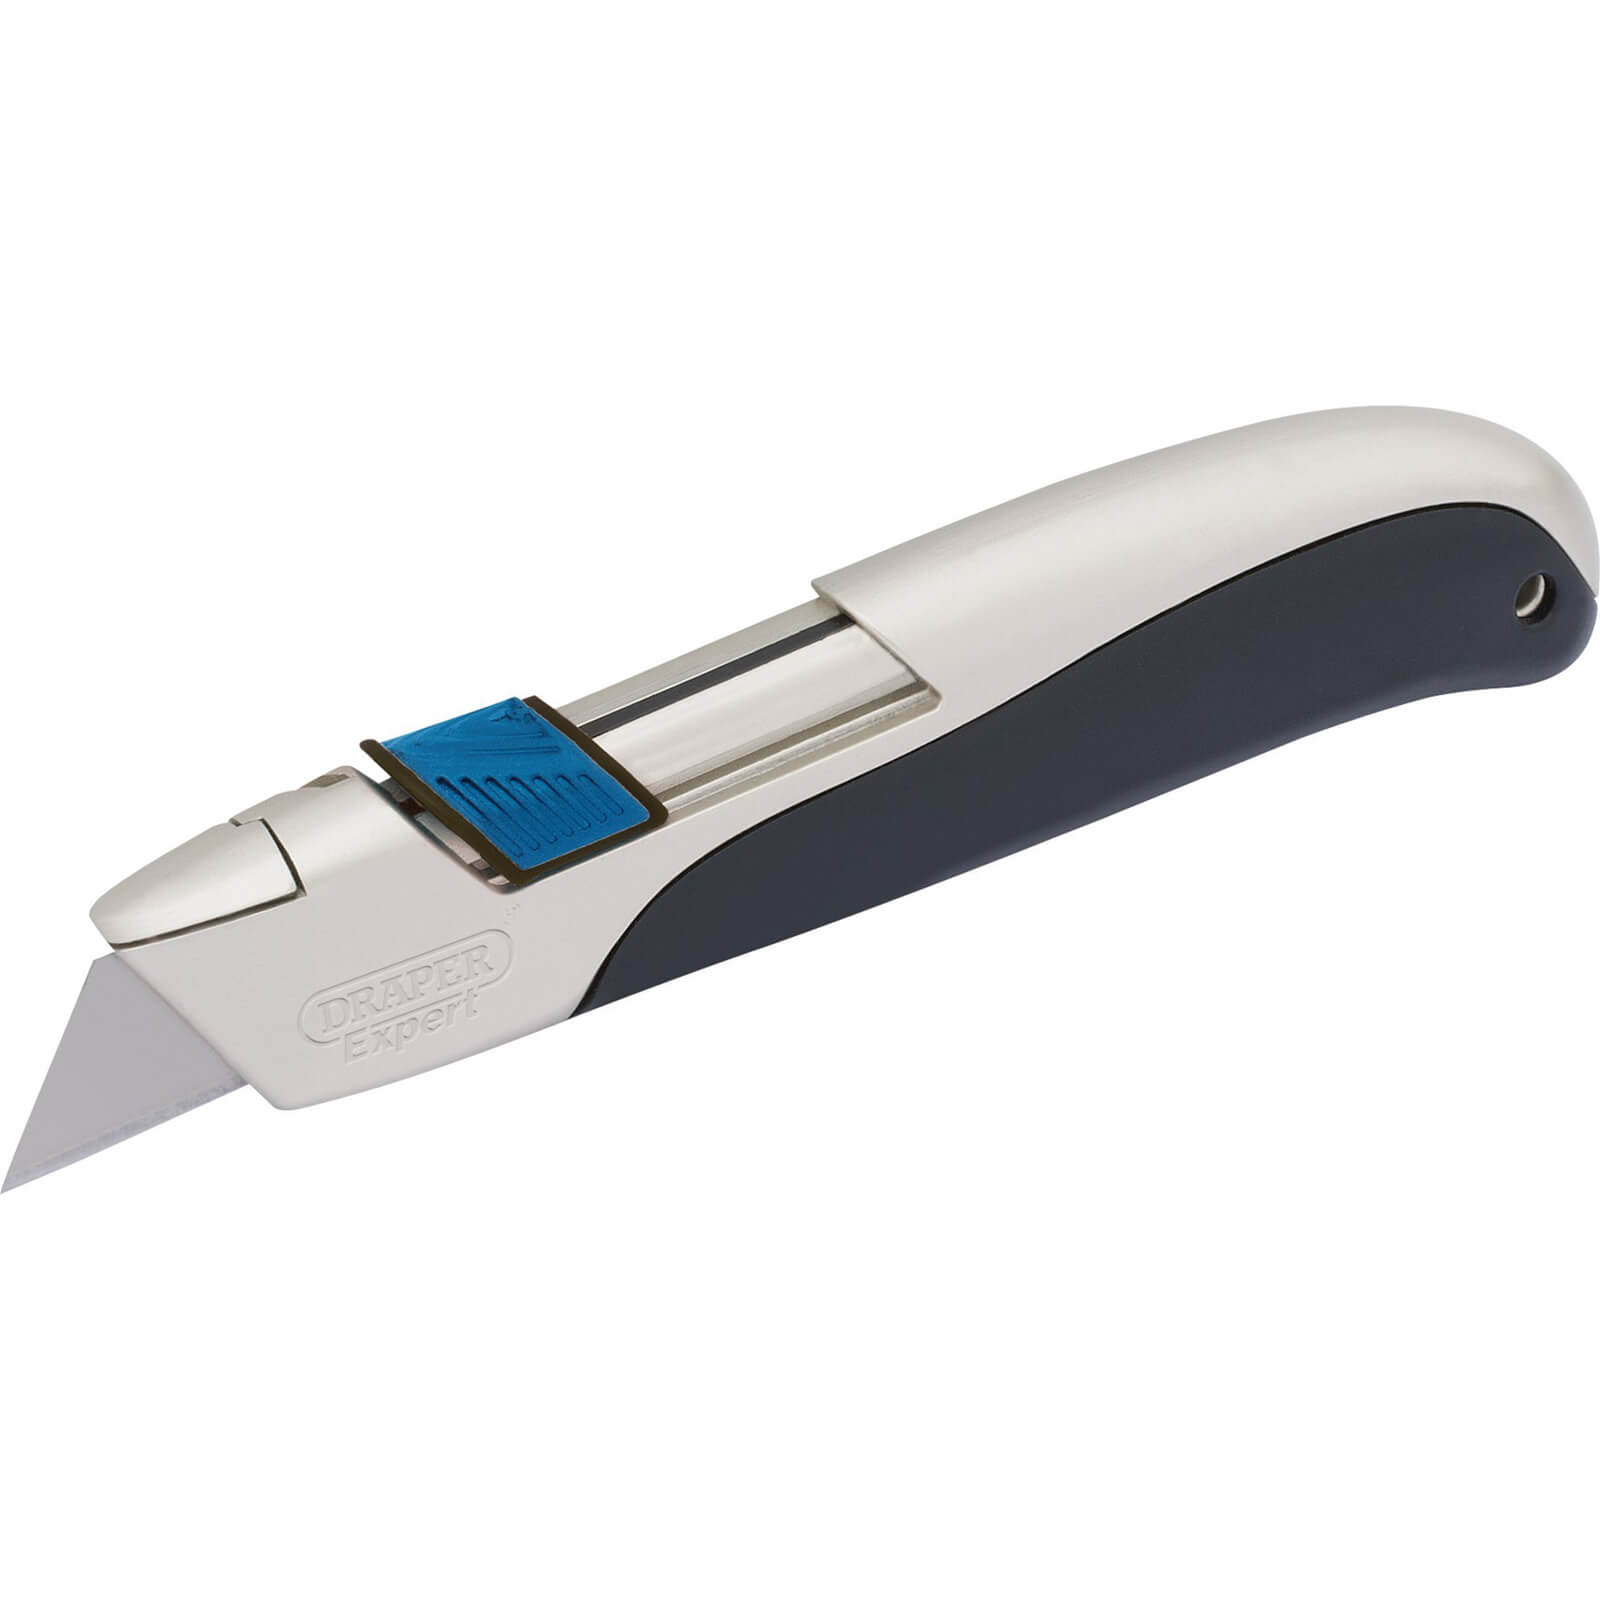 Image of Draper Soft Grip Auto Blade Retract Safety Trimming Knife